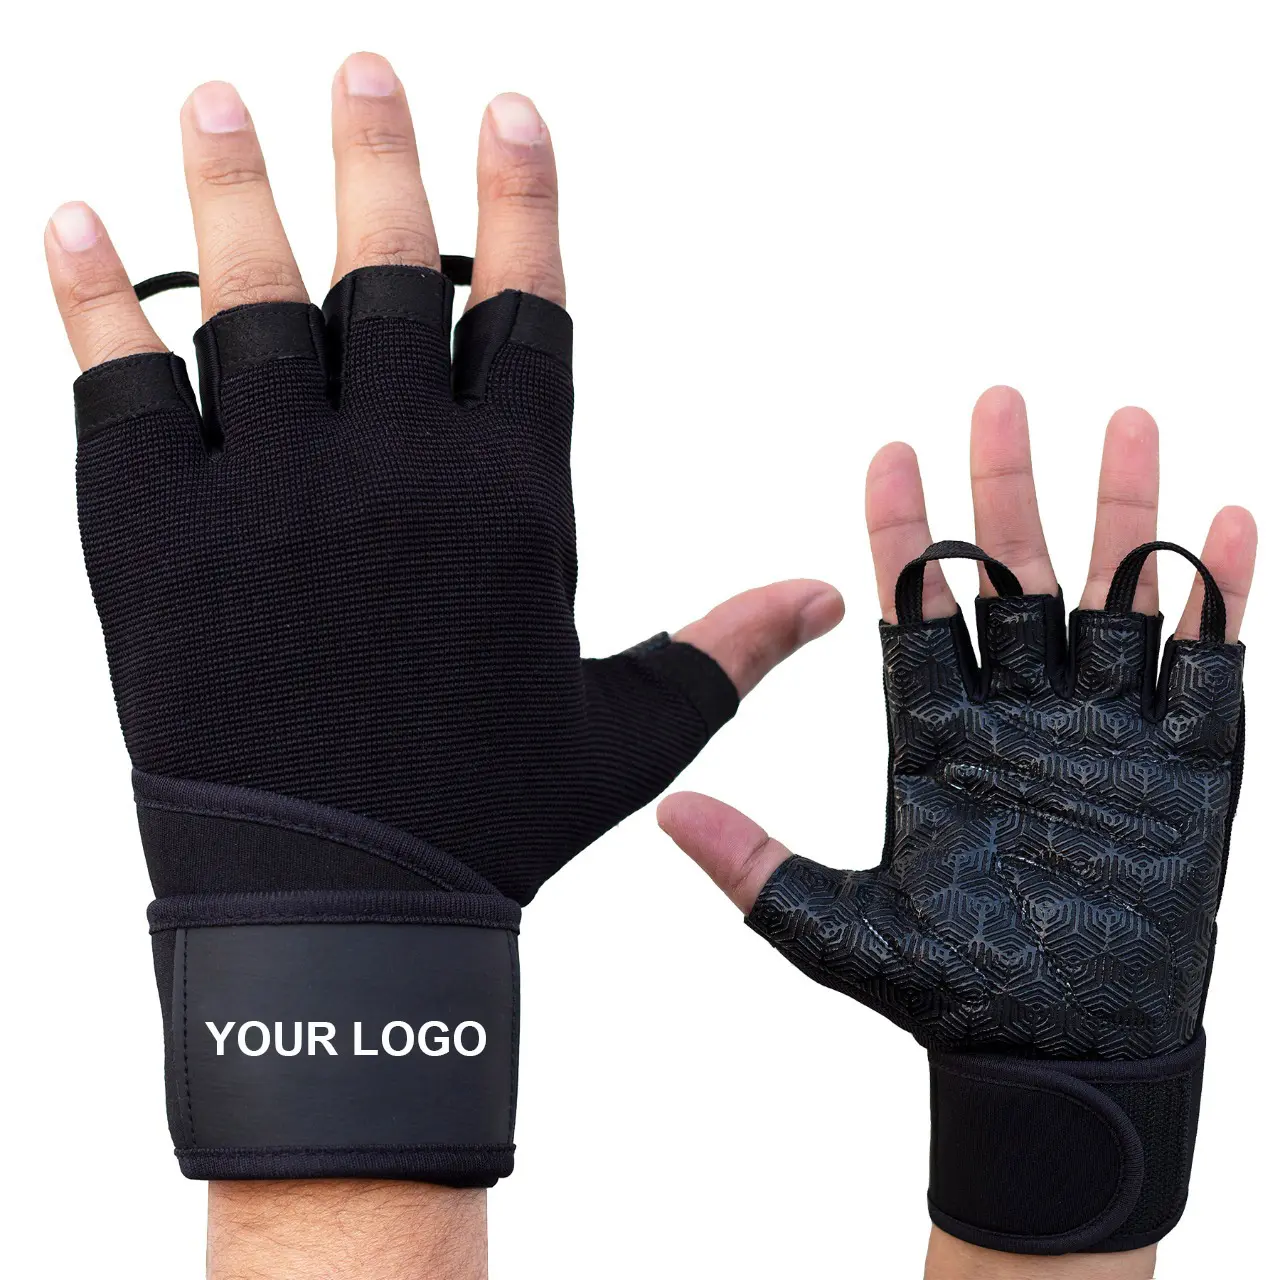 Anti Slip Neoprene Gym Gloves Breathable Sports Workout Fitness Training Weight Lifting Gym Gloves with Wrist Wraps Gym Gears